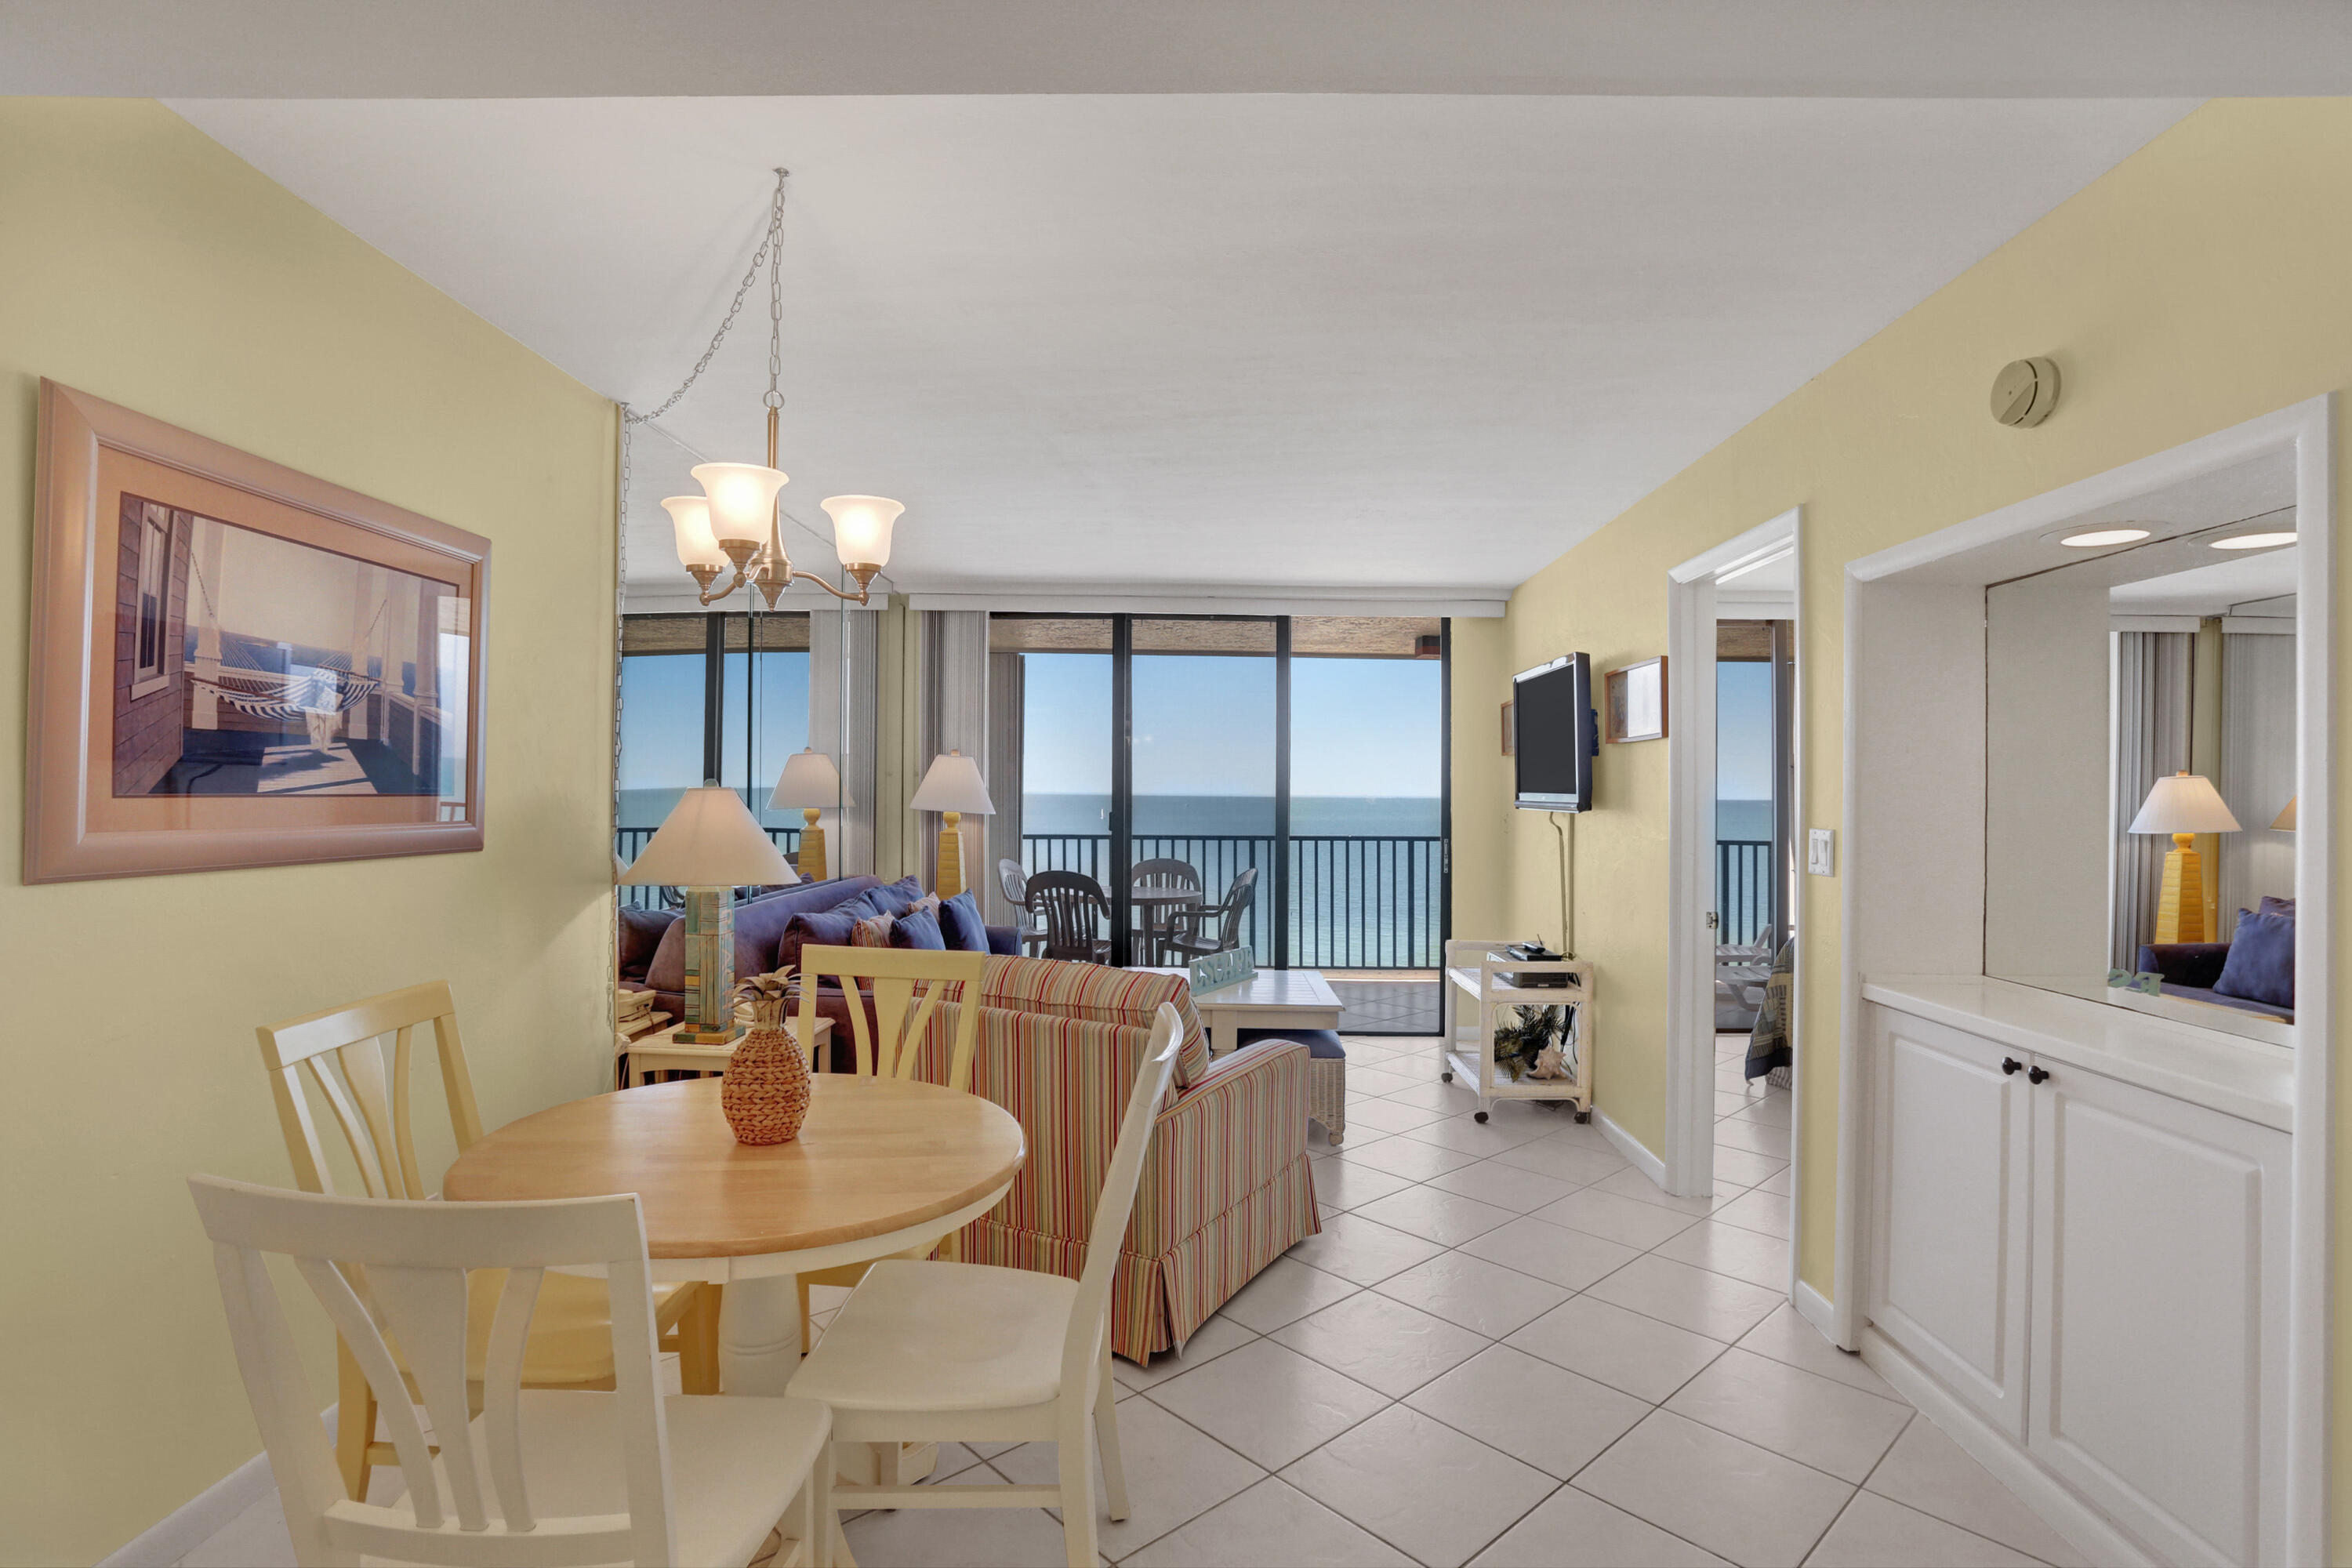 890 S Collier Boulevard Unit 804, Marco Island, Florida, 34145, United States, 2 Bedrooms Bedrooms, ,2 BathroomsBathrooms,Residential,For Sale,890 s collier BLVD unit 804,1499716